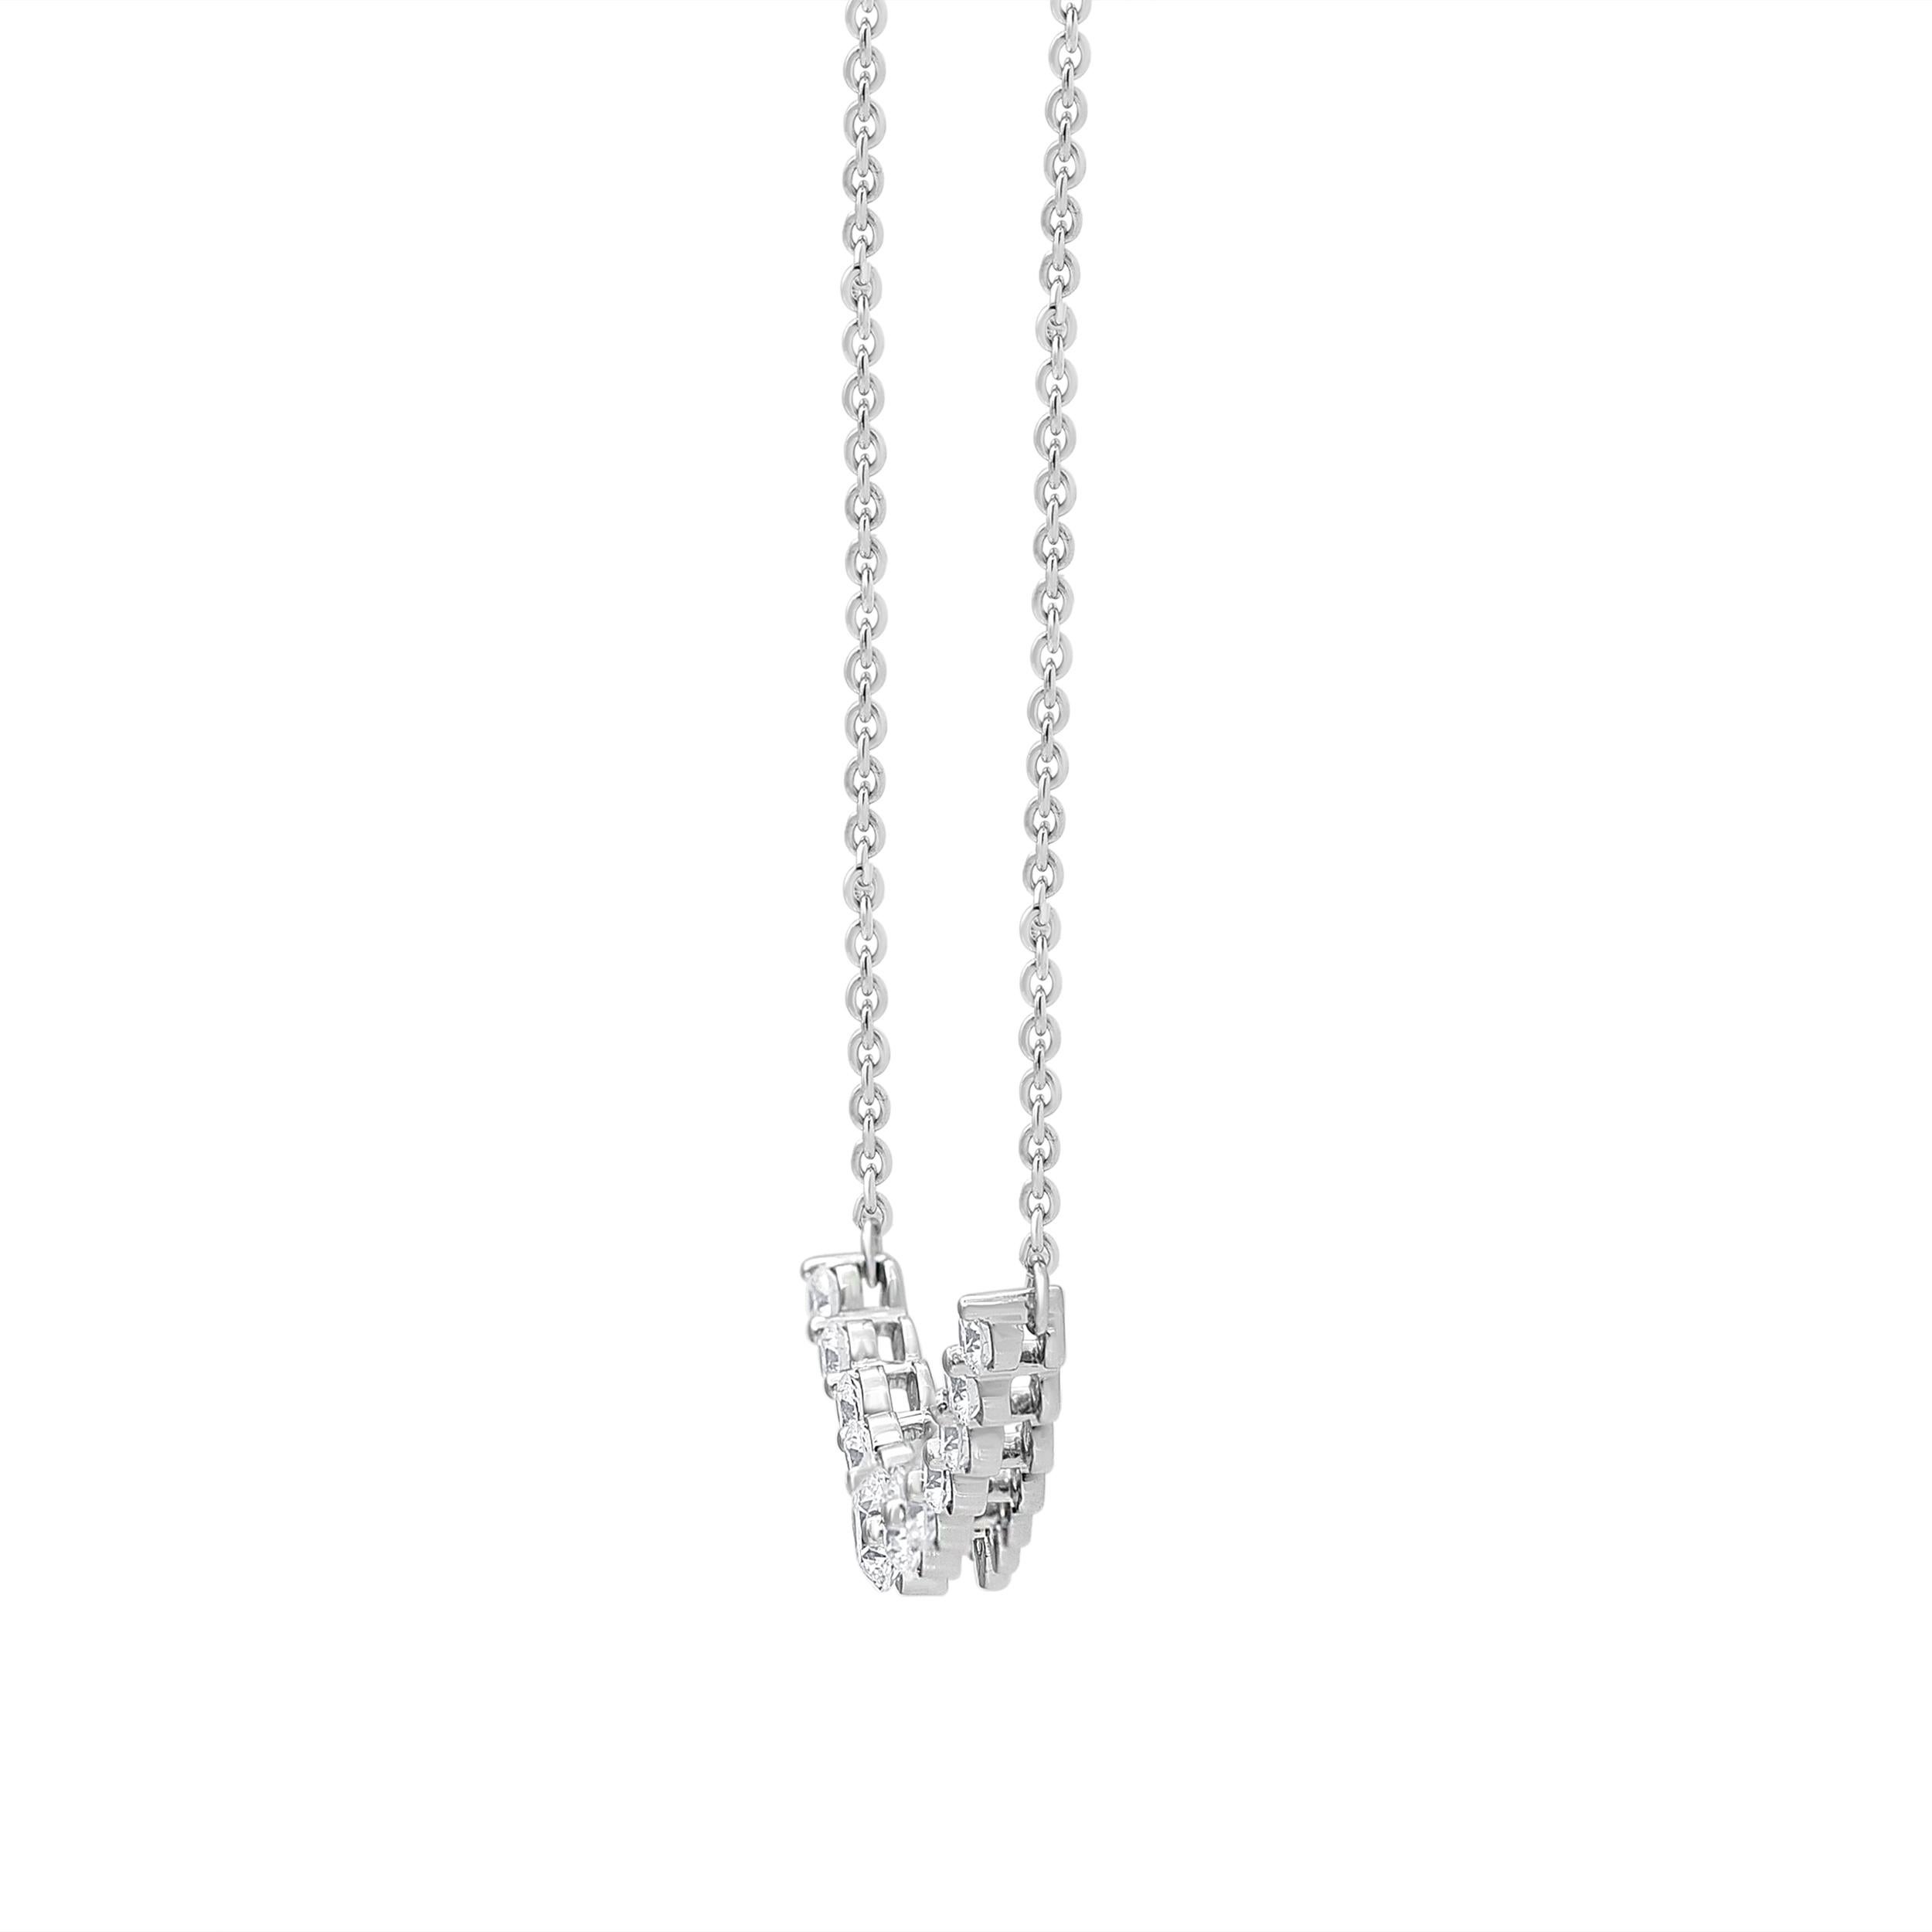 Elevate her attire with the sizzling look of this graduated diamond necklace. Crafted in cool 18K white gold, this shimmering style features a gently curved row of prong-set diamonds that taper down in size toward the sides. Radiant with 2 cttw. of